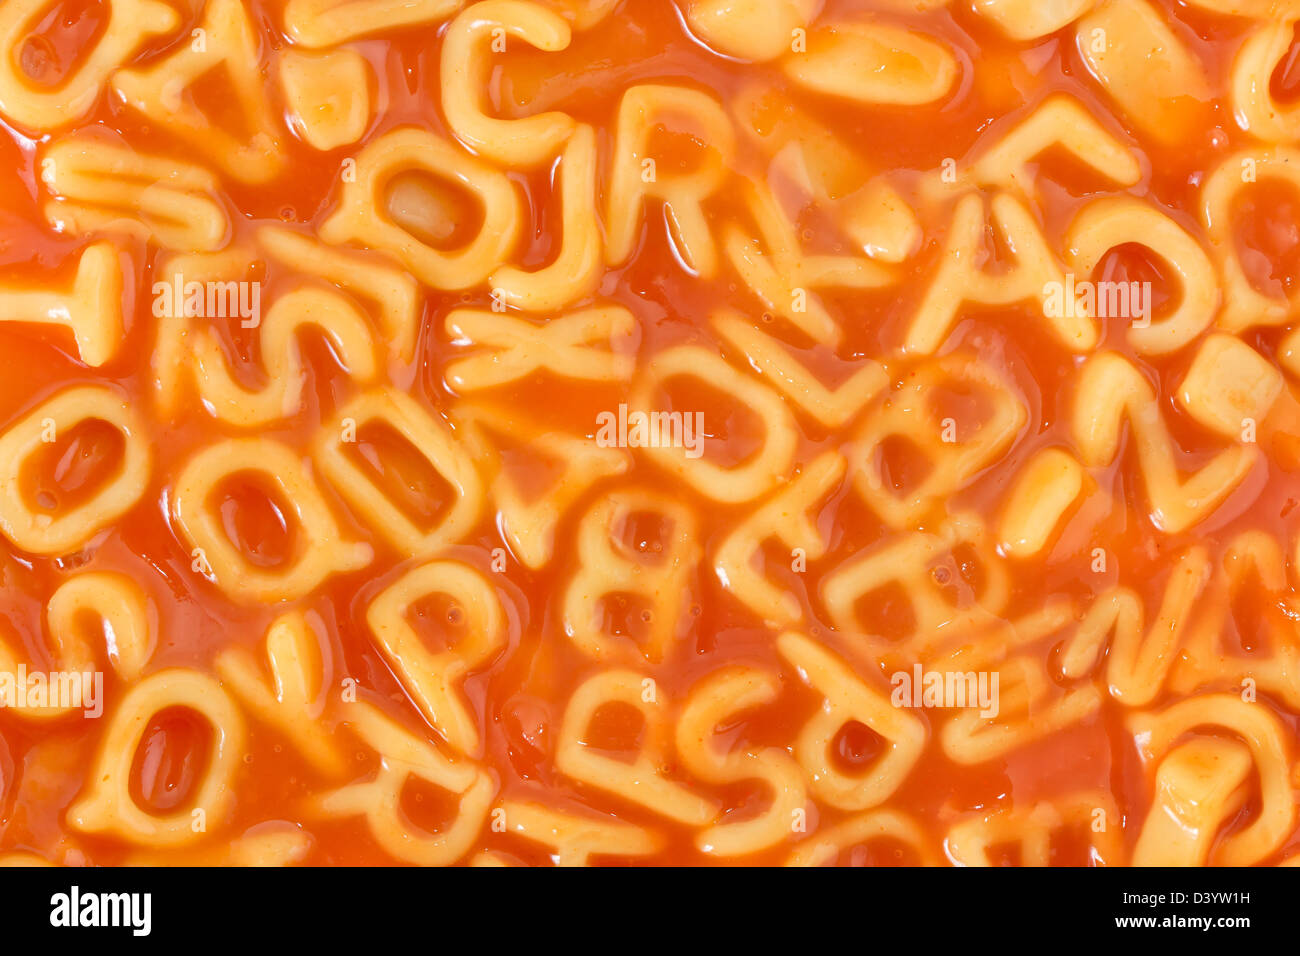 Background of pasta shaped alphabet letters in a tomato sauce Stock Photo